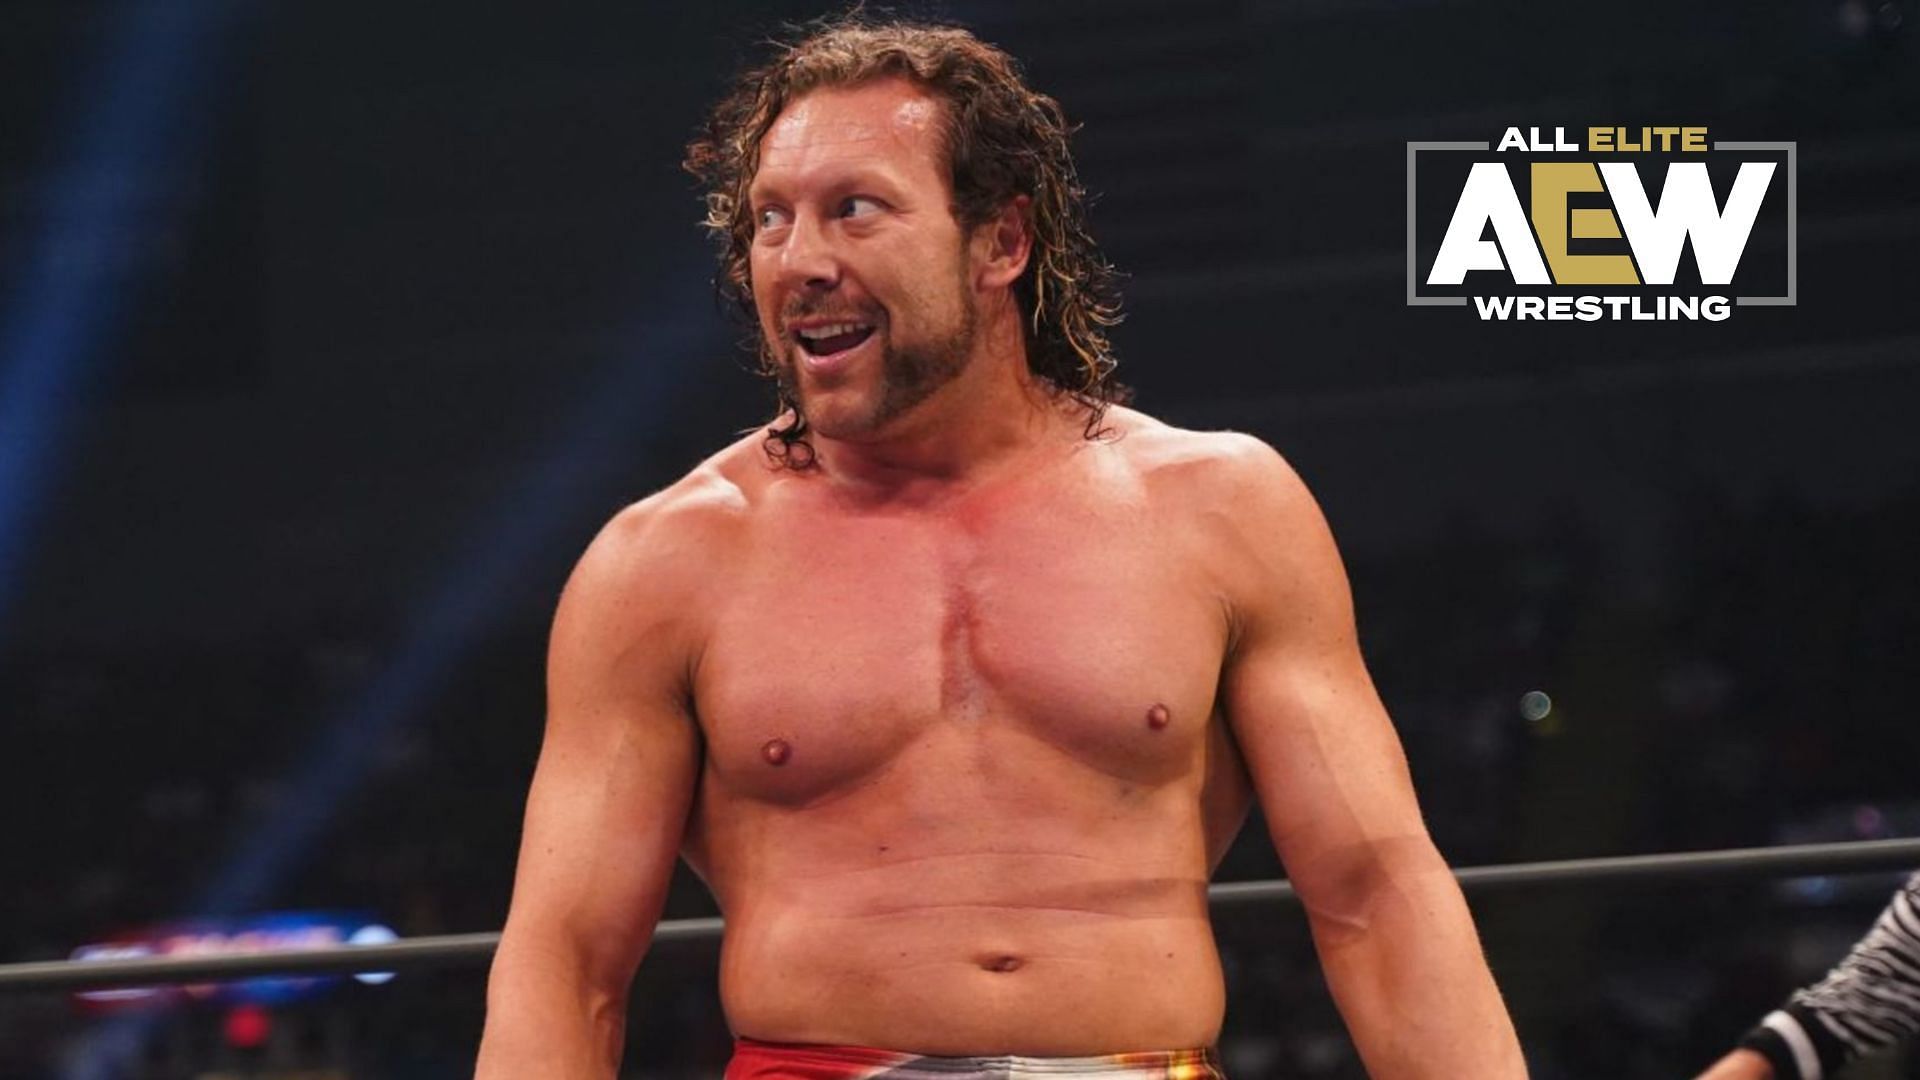 Kenny Omega made his returned this weekend at AEW Full Gear